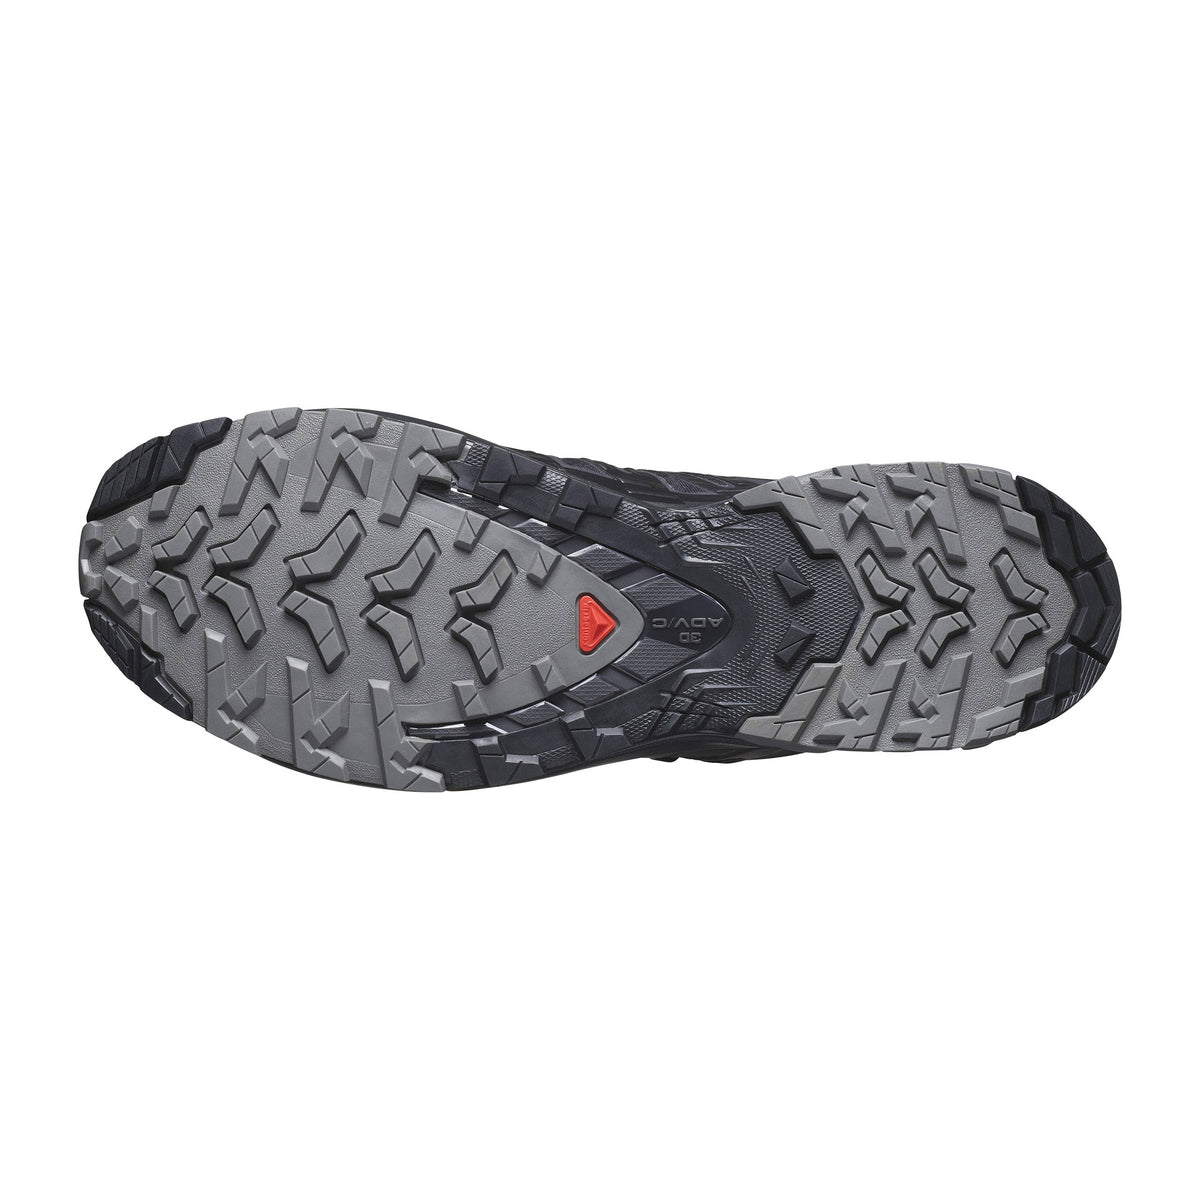 Sole of a Salomon XA Pro 3D V9 GTX Black/Phantom/Pewter - Mens trail running shoe featuring multi-directional treads and a central brand logo in red on gray background.